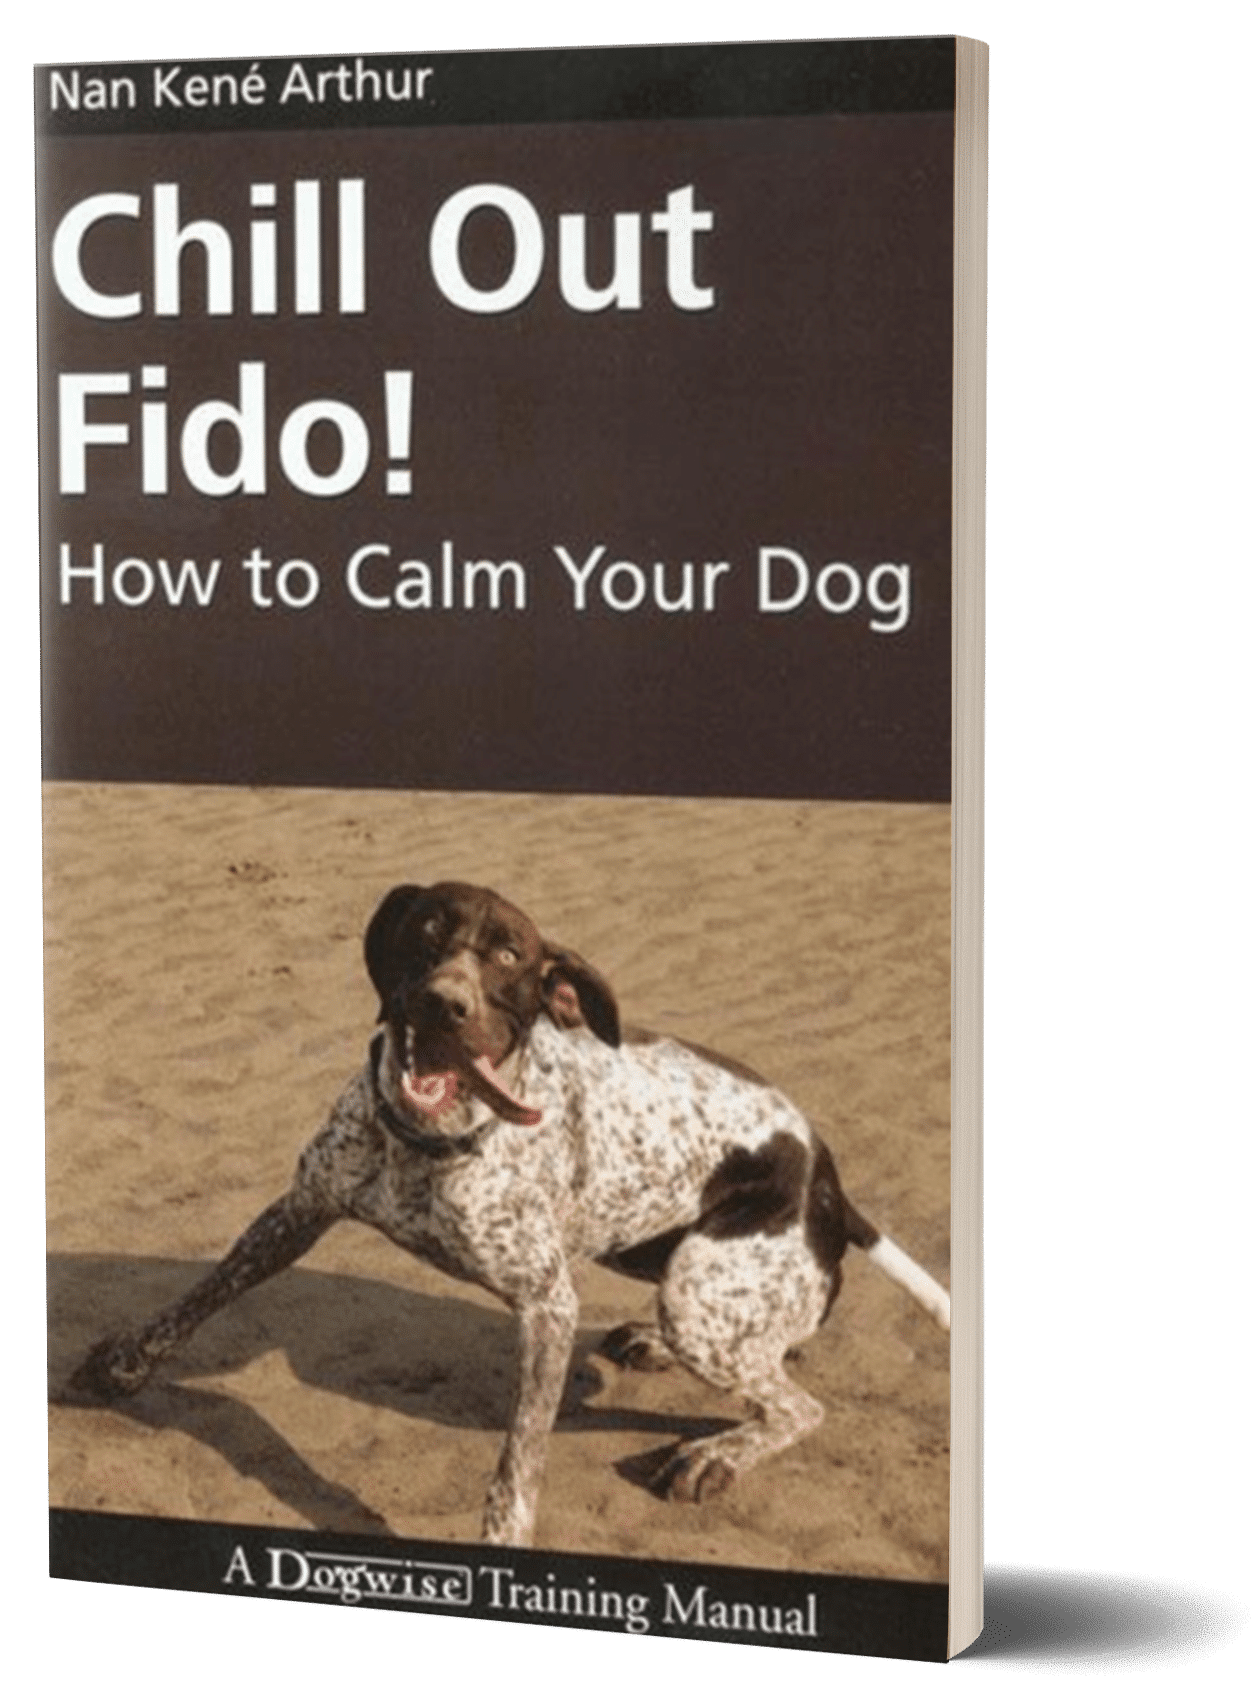 chill out fido how to calm your dog book cover